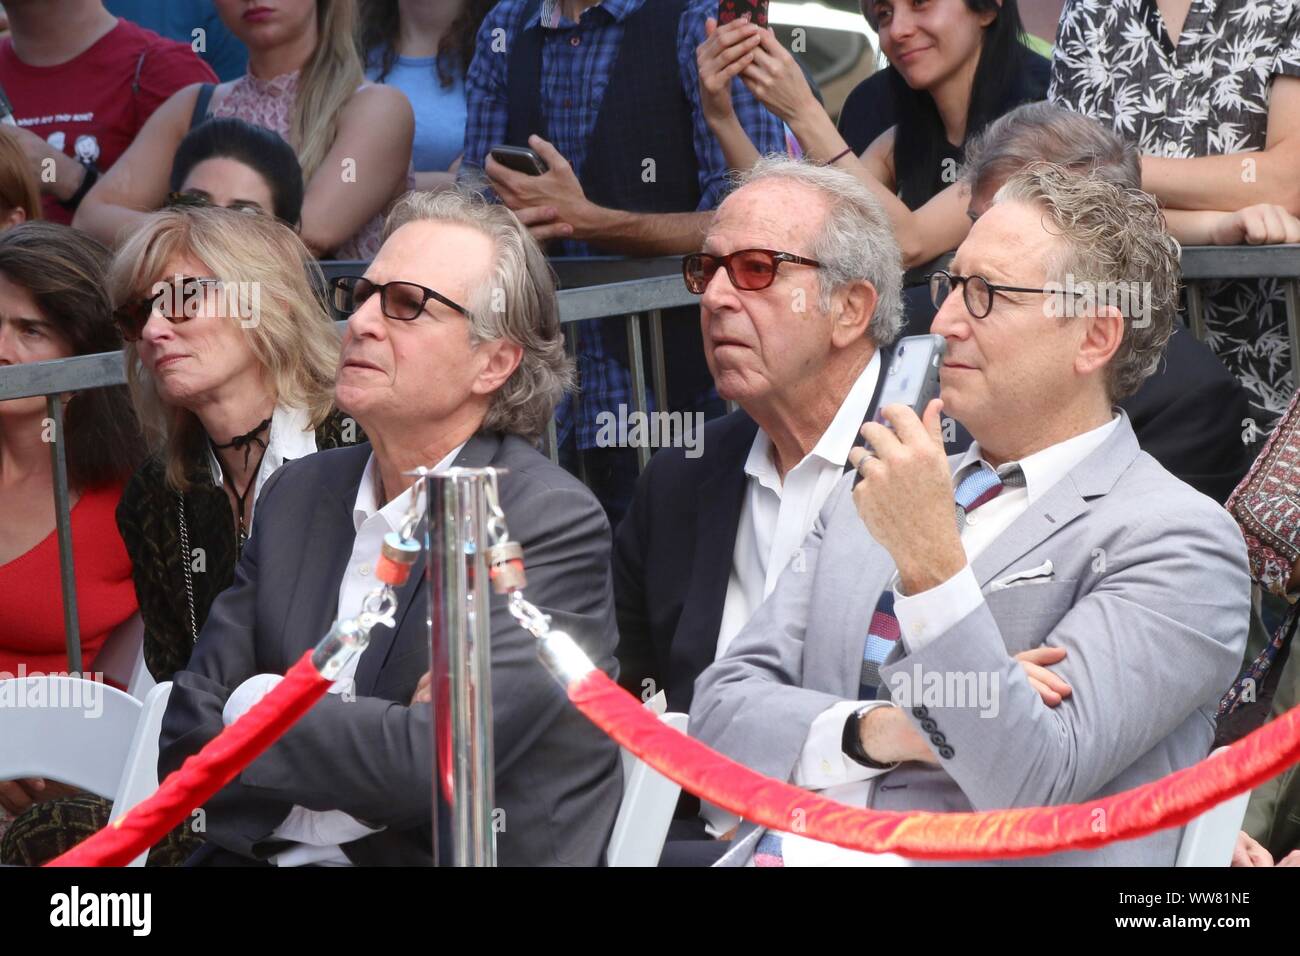 Los Angeles, CA. 12th Sep, 2019. LOS ANGELES - SEP 12: David Steinberg, Robert Desiderio, Brynn Thayer, Bernard Telsey at the Judith Light Star Ceremony on the Hollywood Walk of Fame on September 12, 2019 in Los Angeles, CA at the induction ceremony for Star on the Hollywood Walk of Fame for Judith Light, Hollywood Boulevard, Los Angeles, CA September 12, 2019. Credit: Priscilla Grant/Everett Collection/Alamy Live News Stock Photo